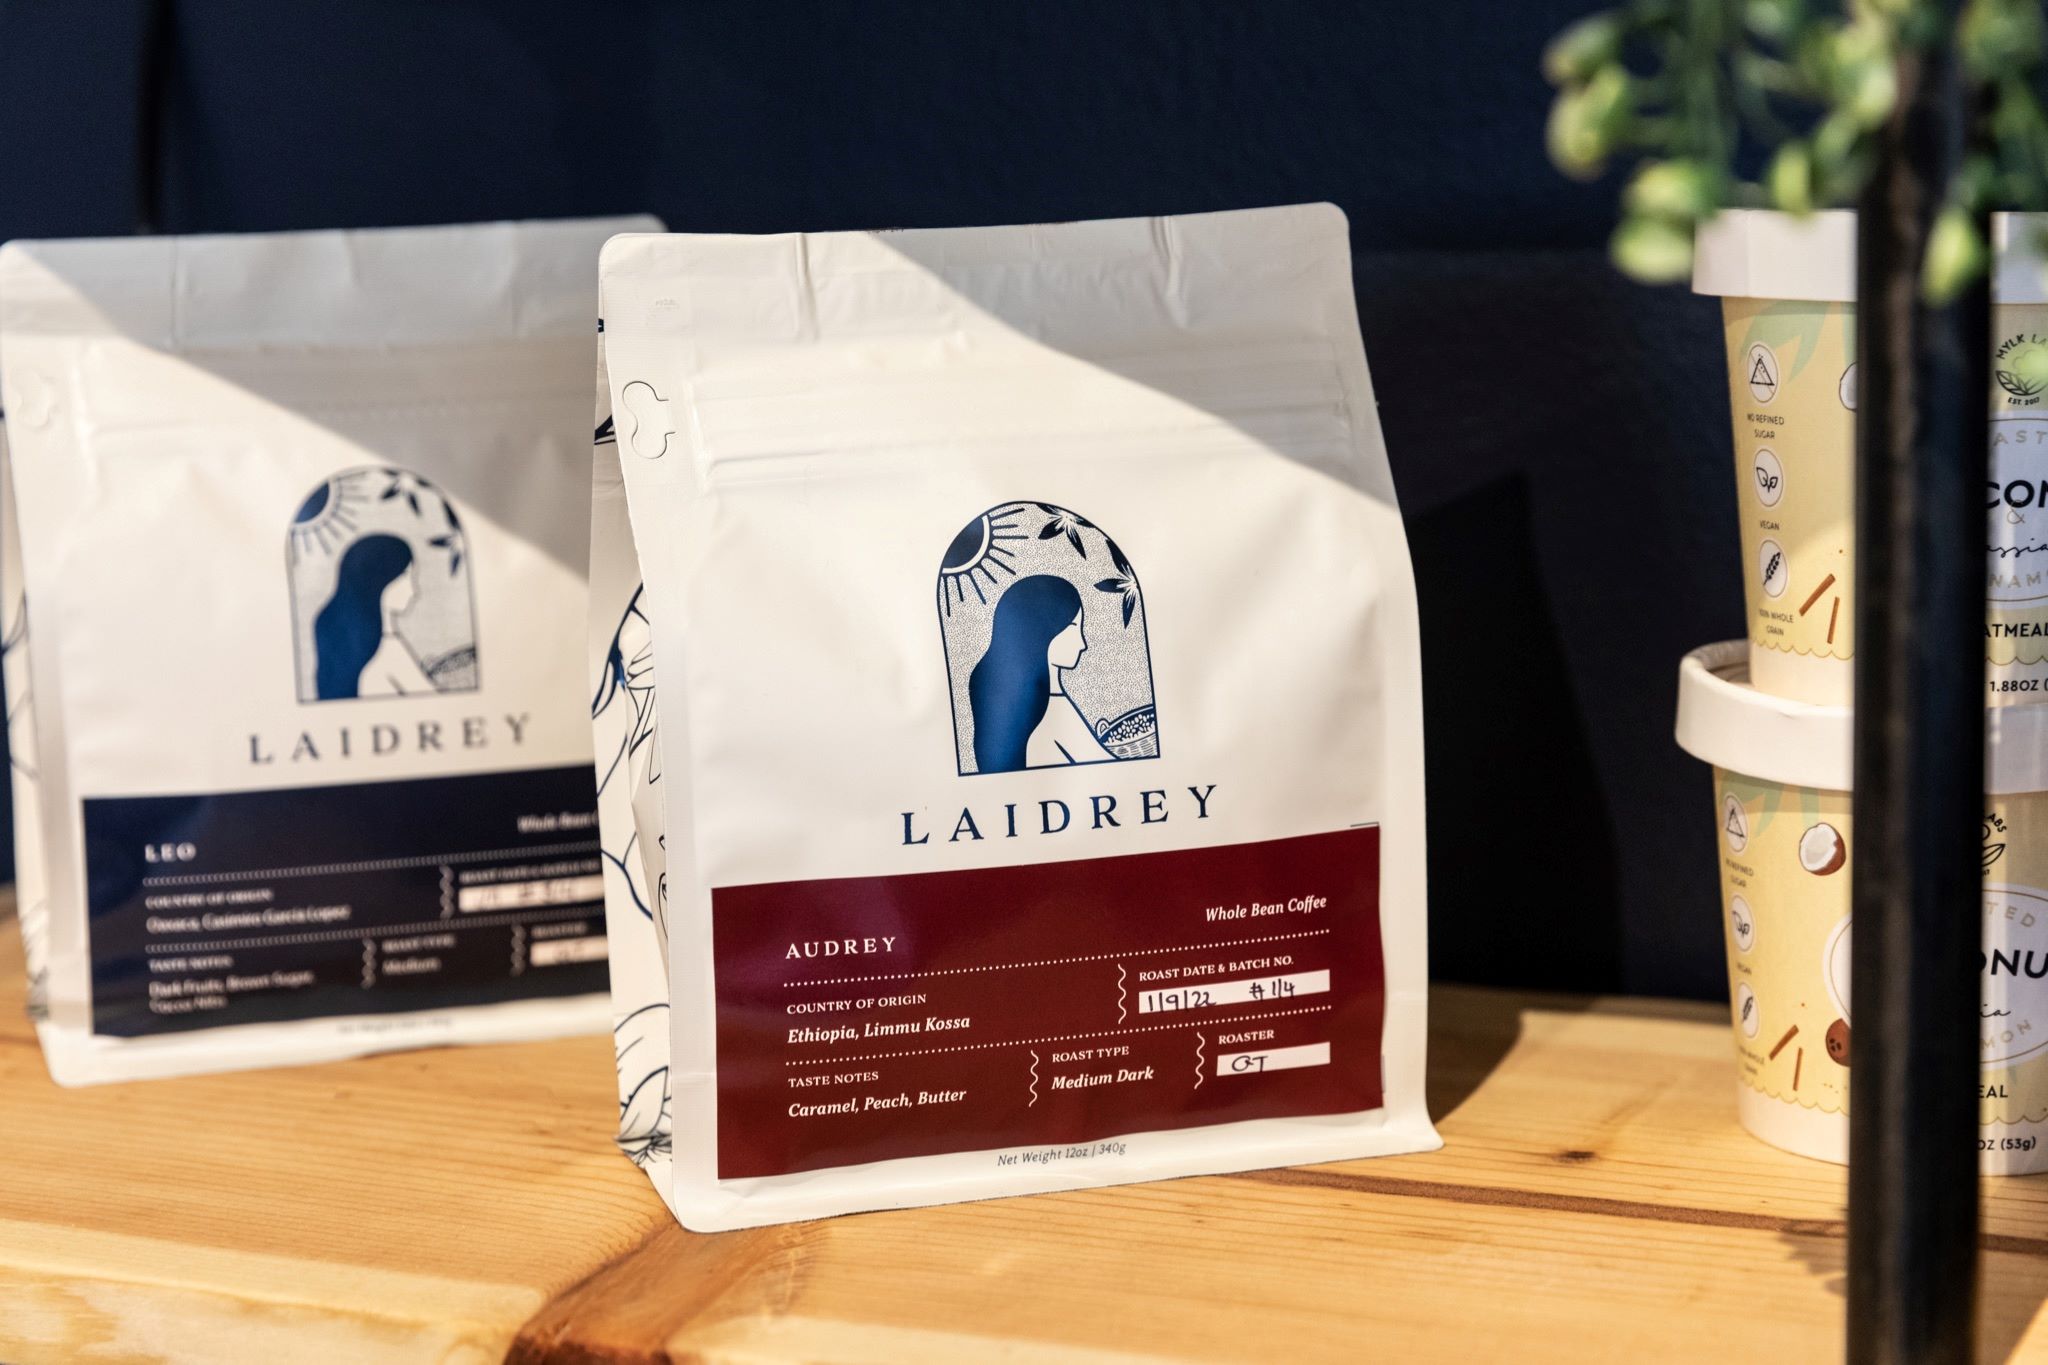 An image of two bags of Laidrey Coffee.